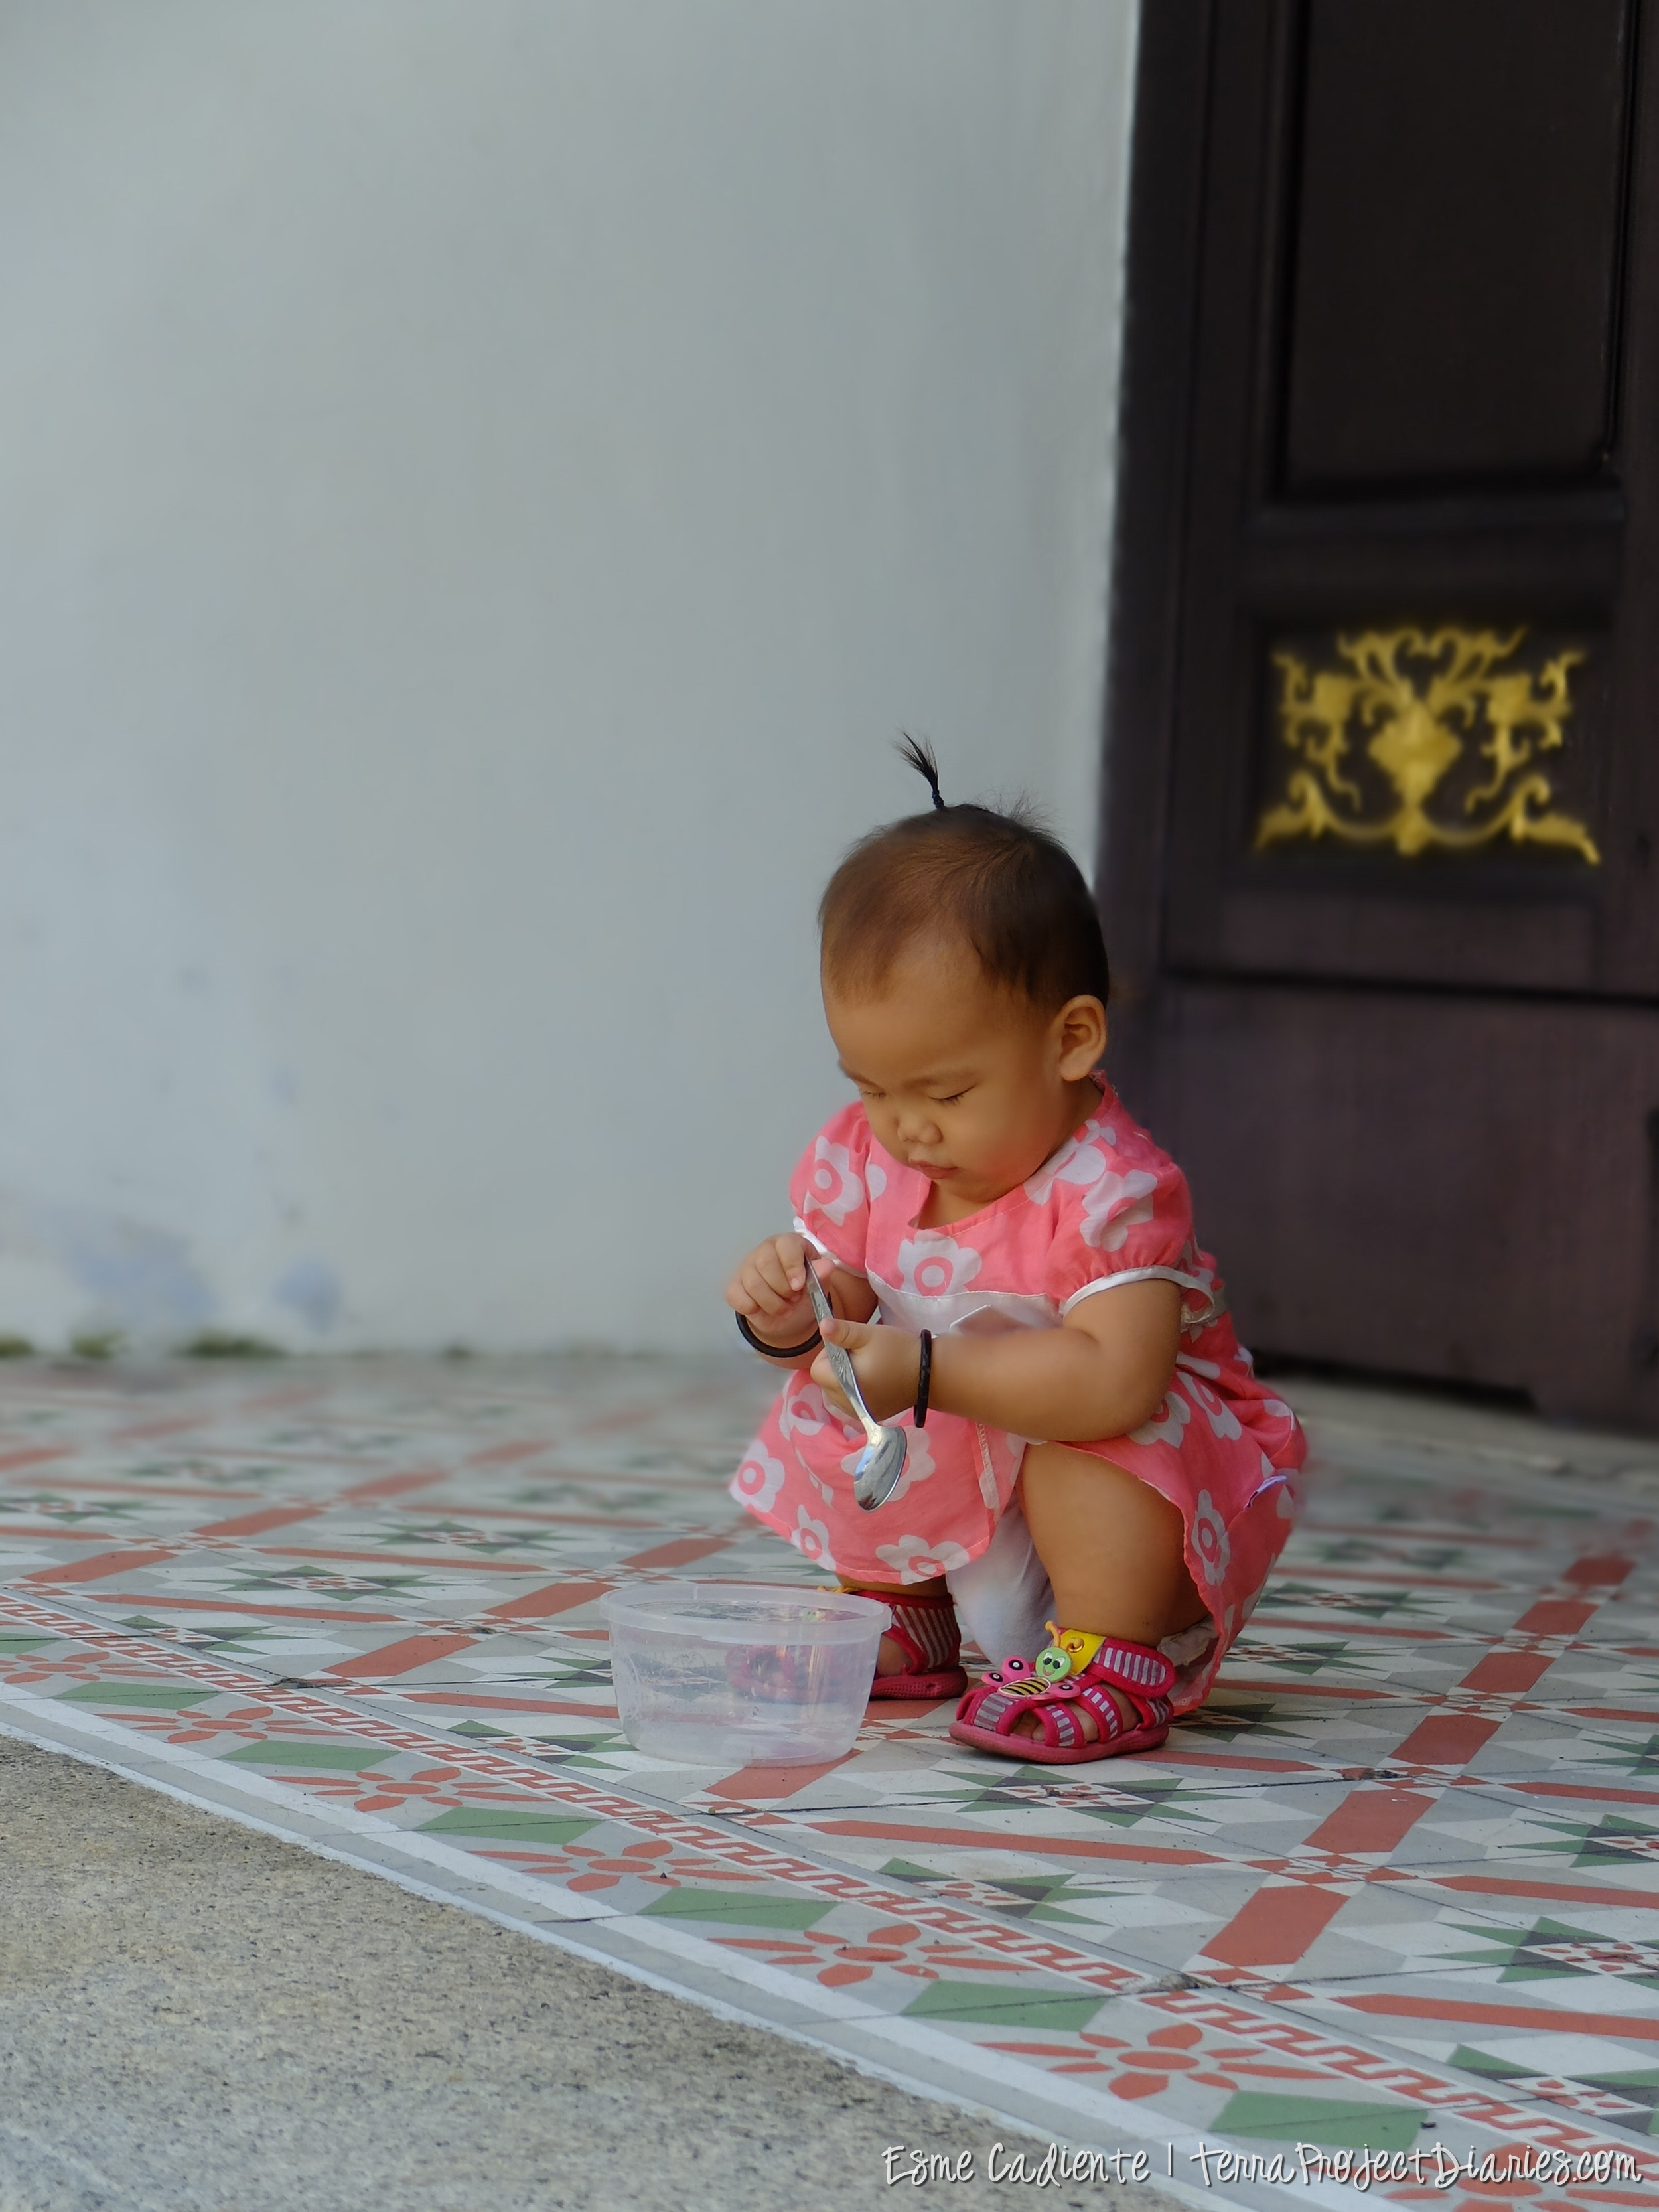 Chinese baby playing in a temple